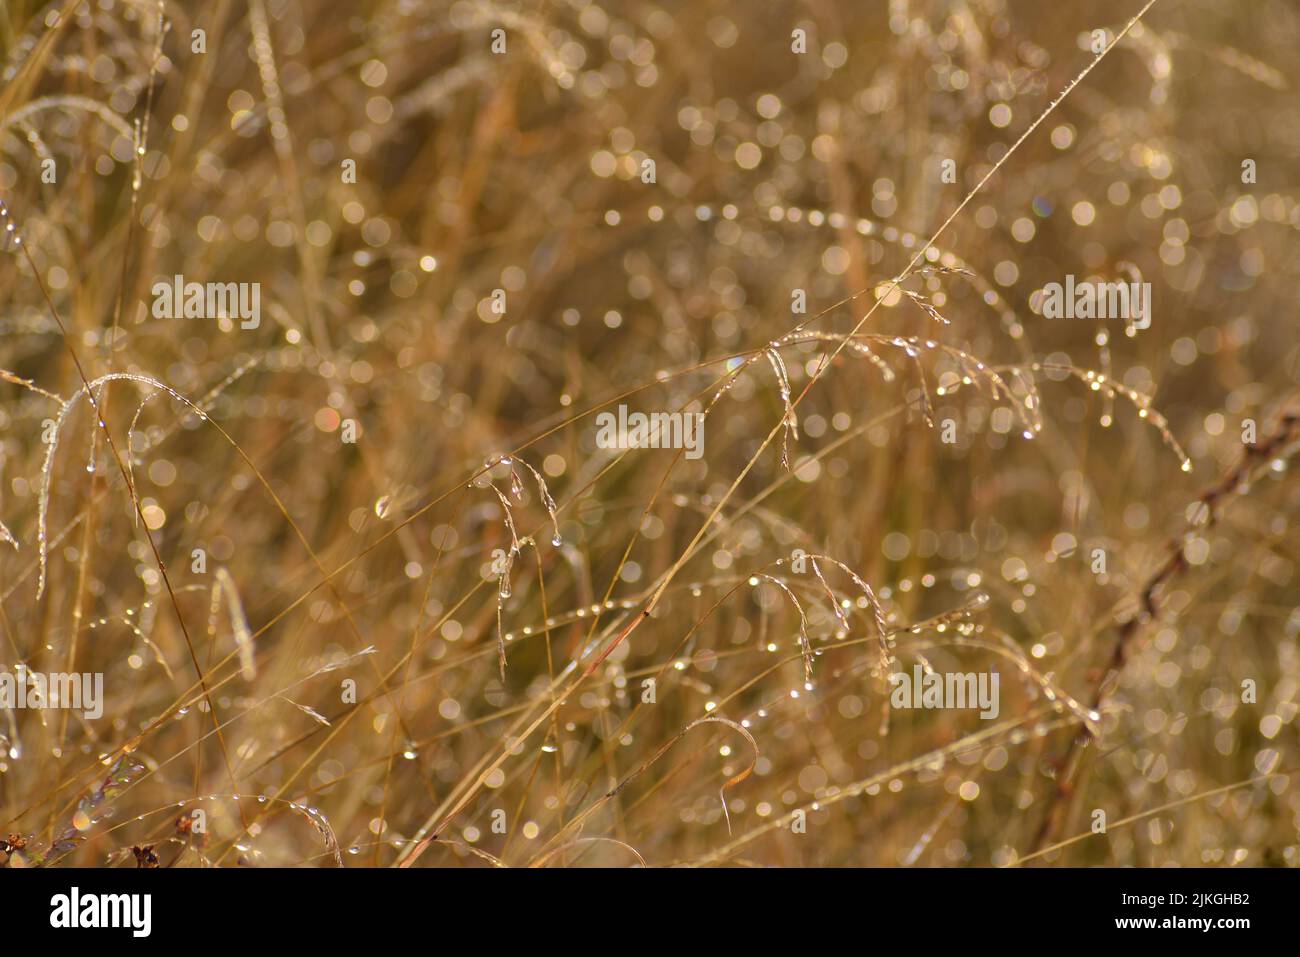 Ripe grass with condensed water droplets on autumn morning Stock Photo